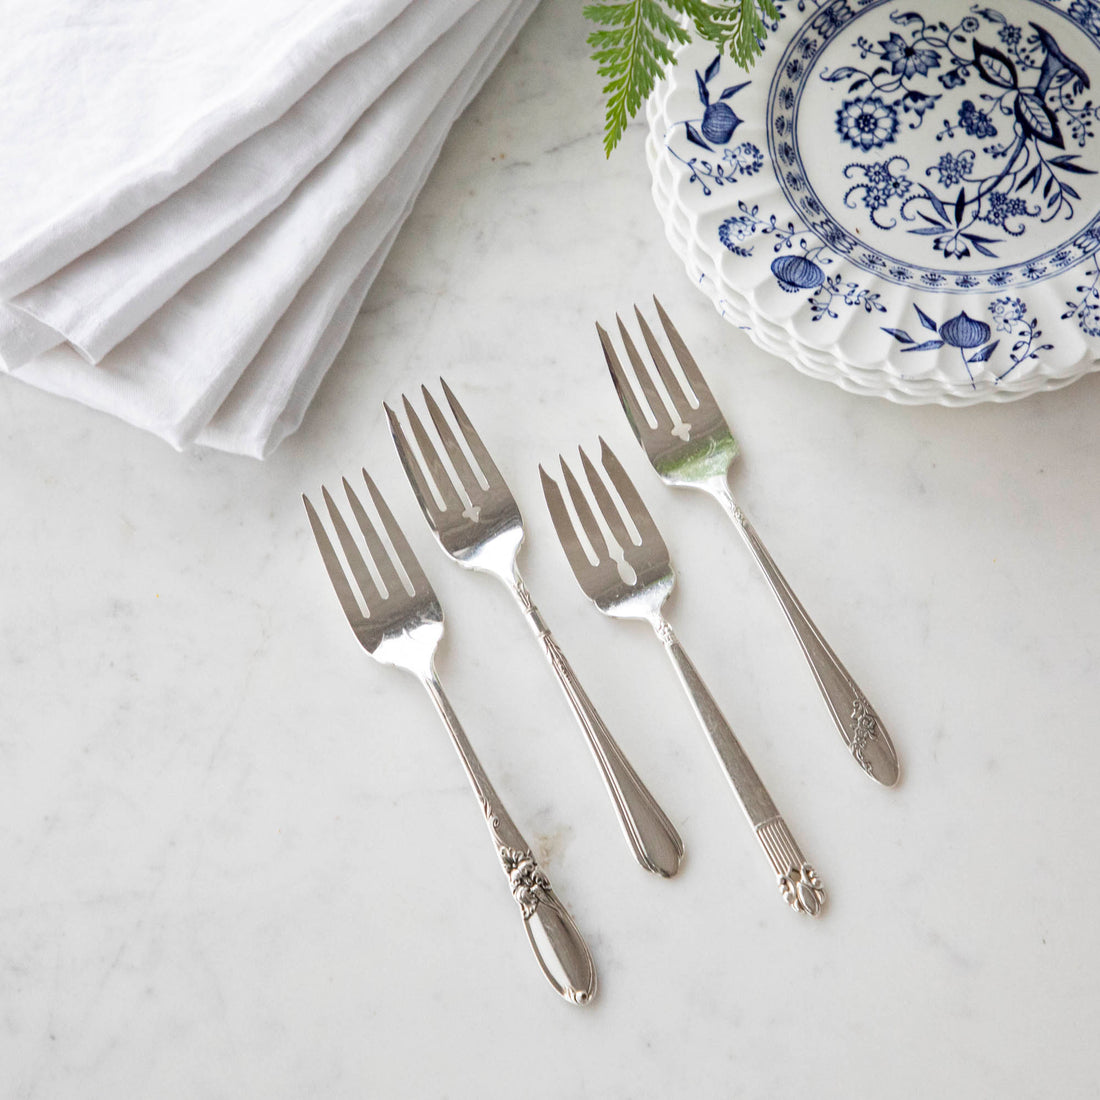 Four Hester &amp; Cook vintage silver-plate salad forks beside a blue and white patterned plate with a white napkin and a sprig of greenery.